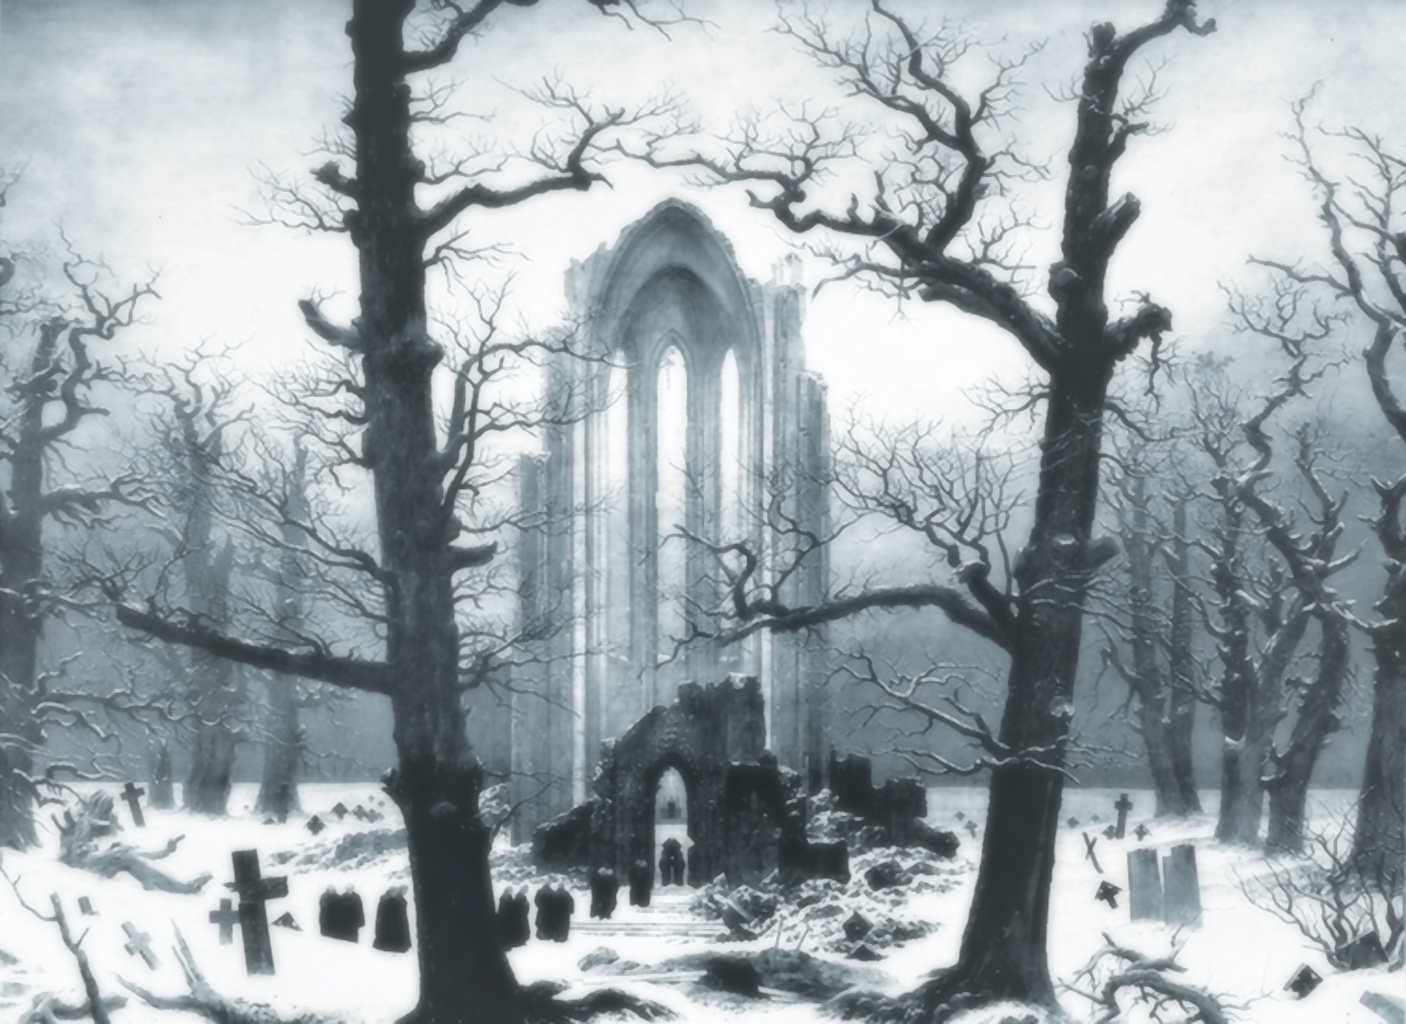 Popular Cemetery Image for Phone